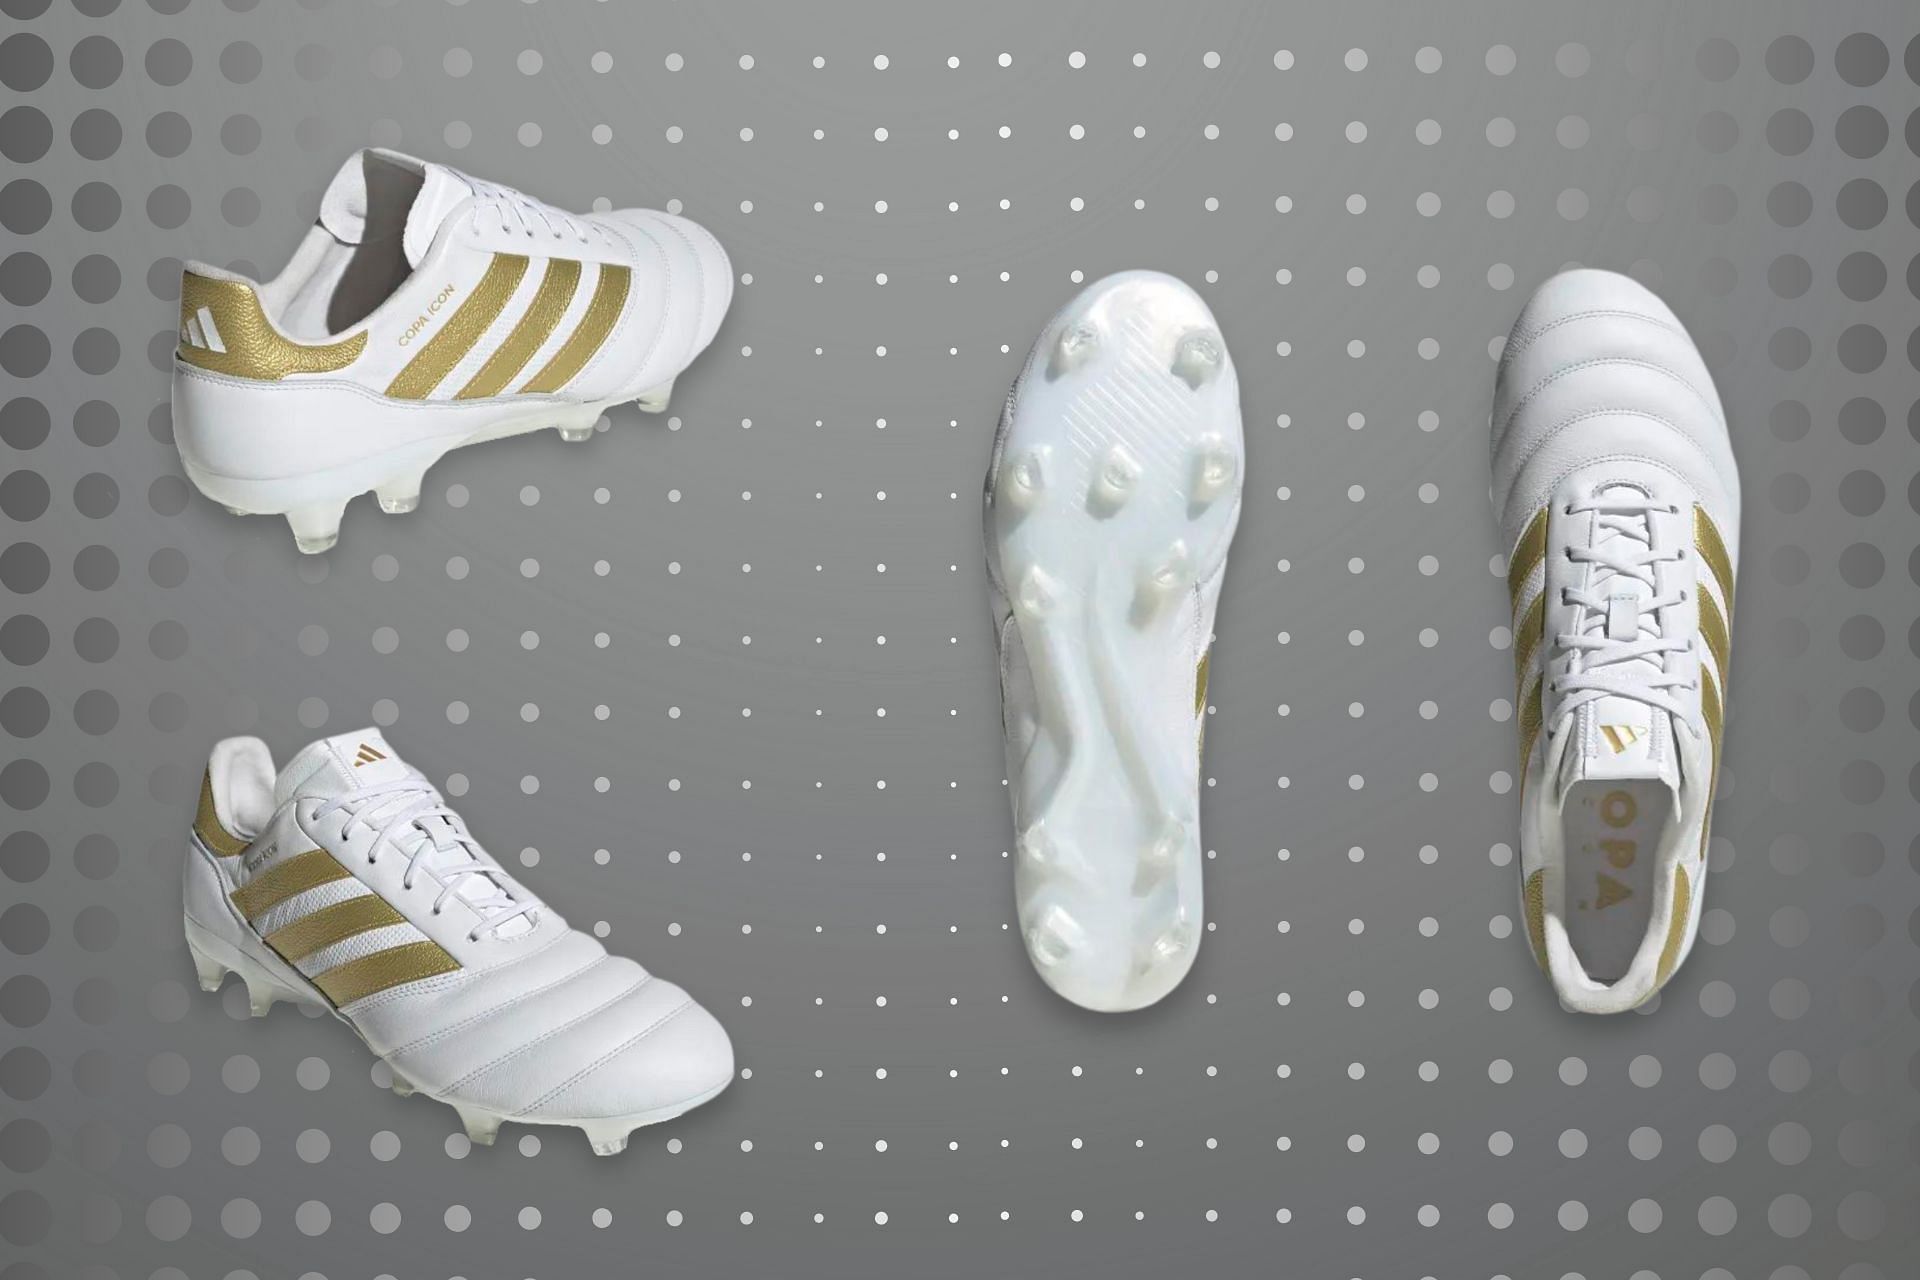 Recently released Adidas Copa Mundial .1 Firm Ground football boots clad in Cloud White and Gold Metallic (Image via Sportskeeda)